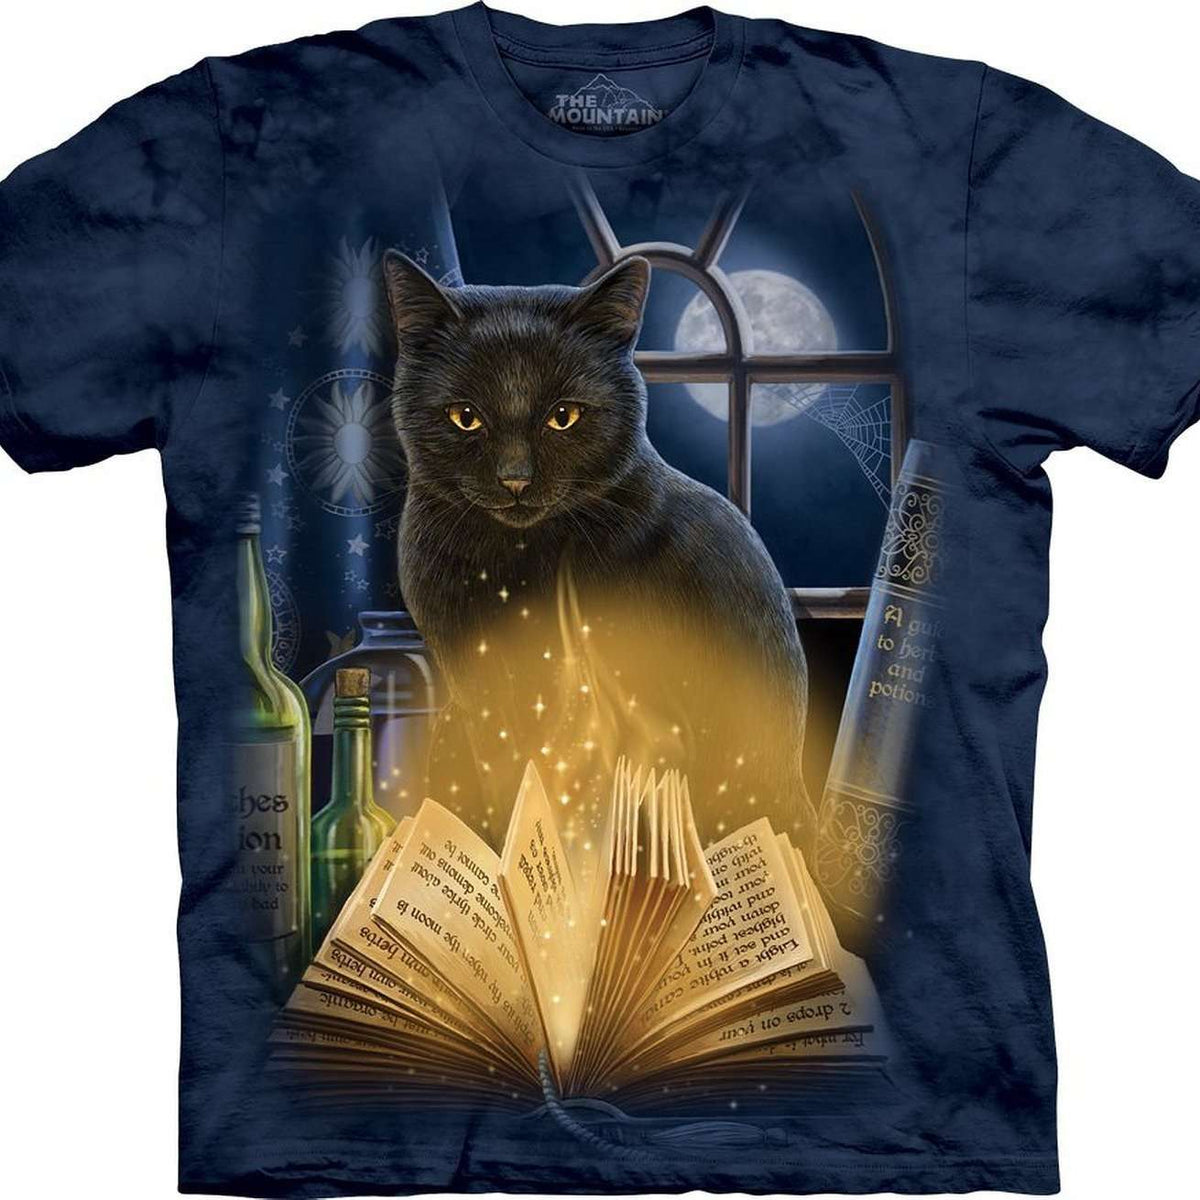 By Spellbook Shout Shir Black Bewitched Cat Wizardy The | MyUtopia by Mountain Tee Designs Out Magical